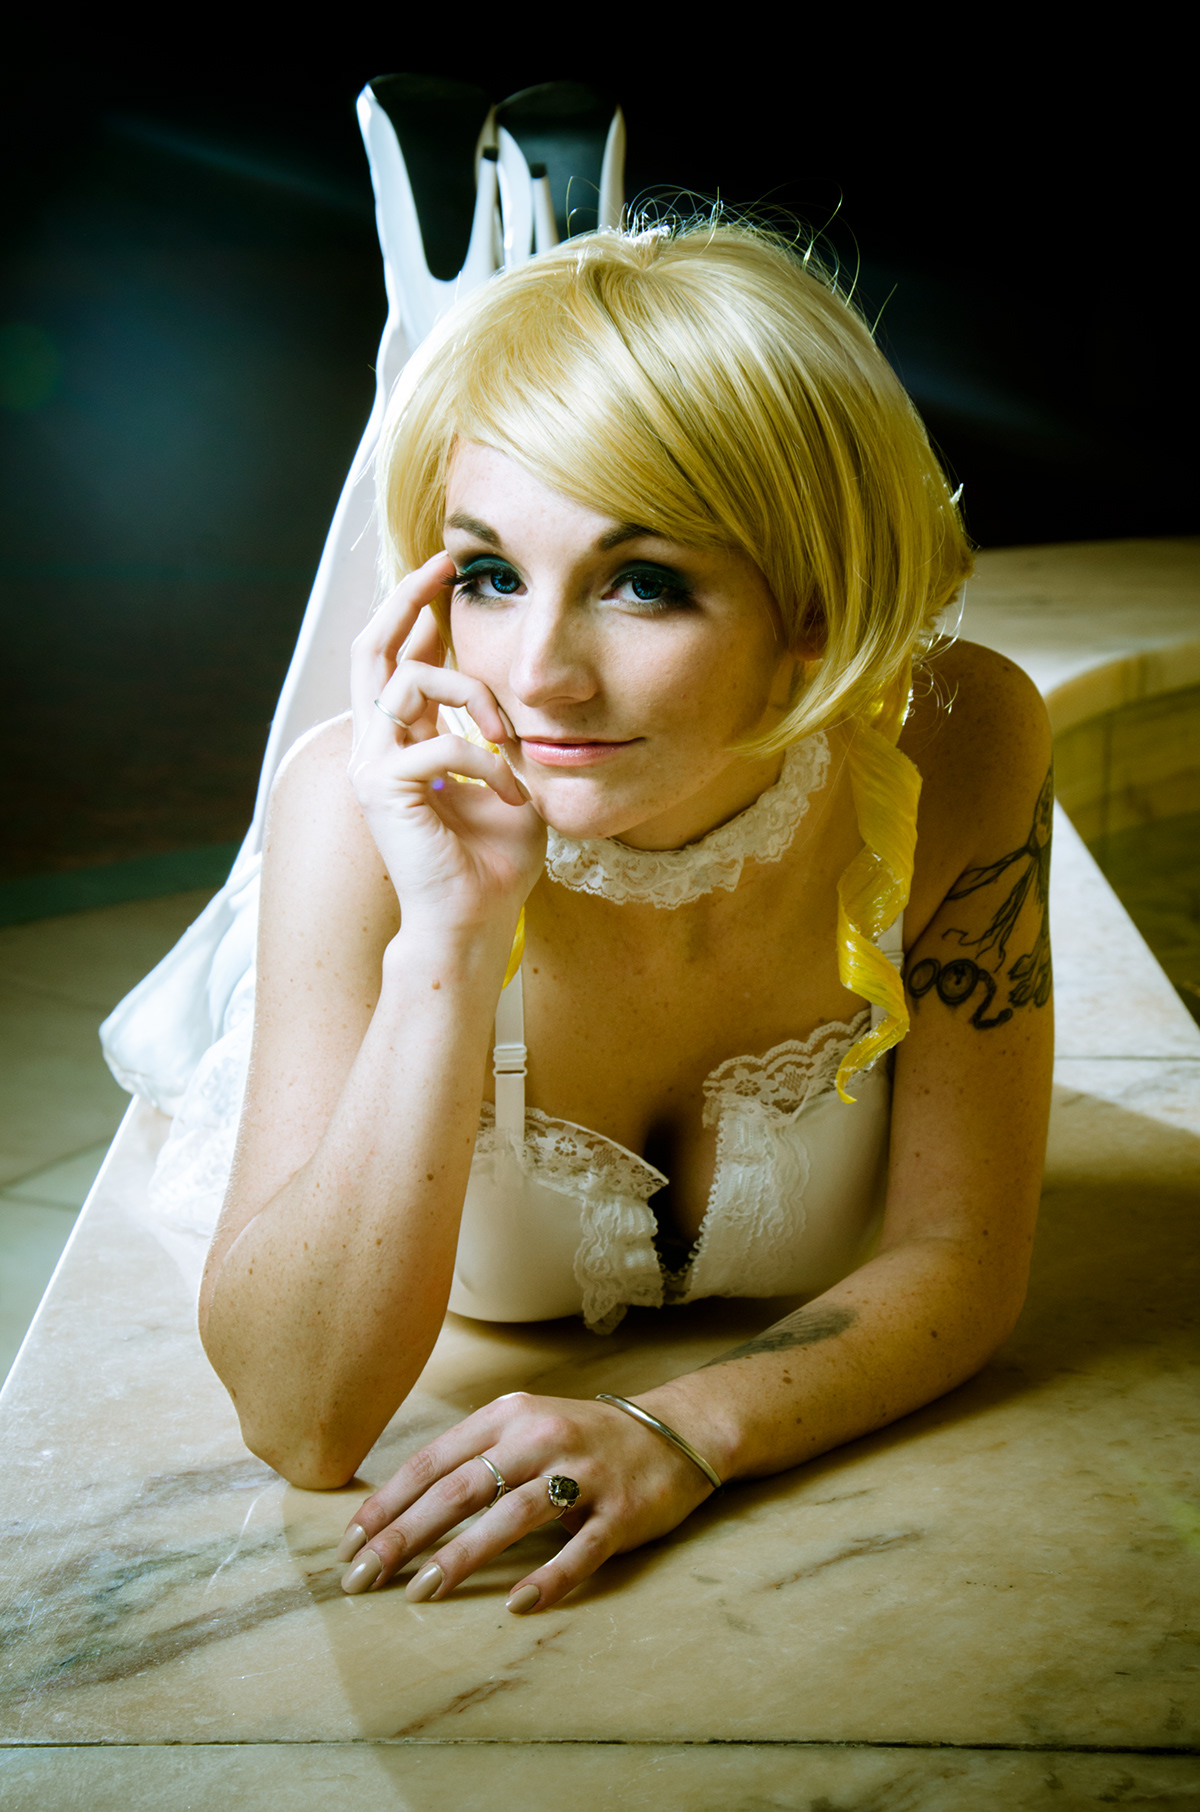 Catherine Cosplay anime midwest Anime Midwest chicago photographer Nikin